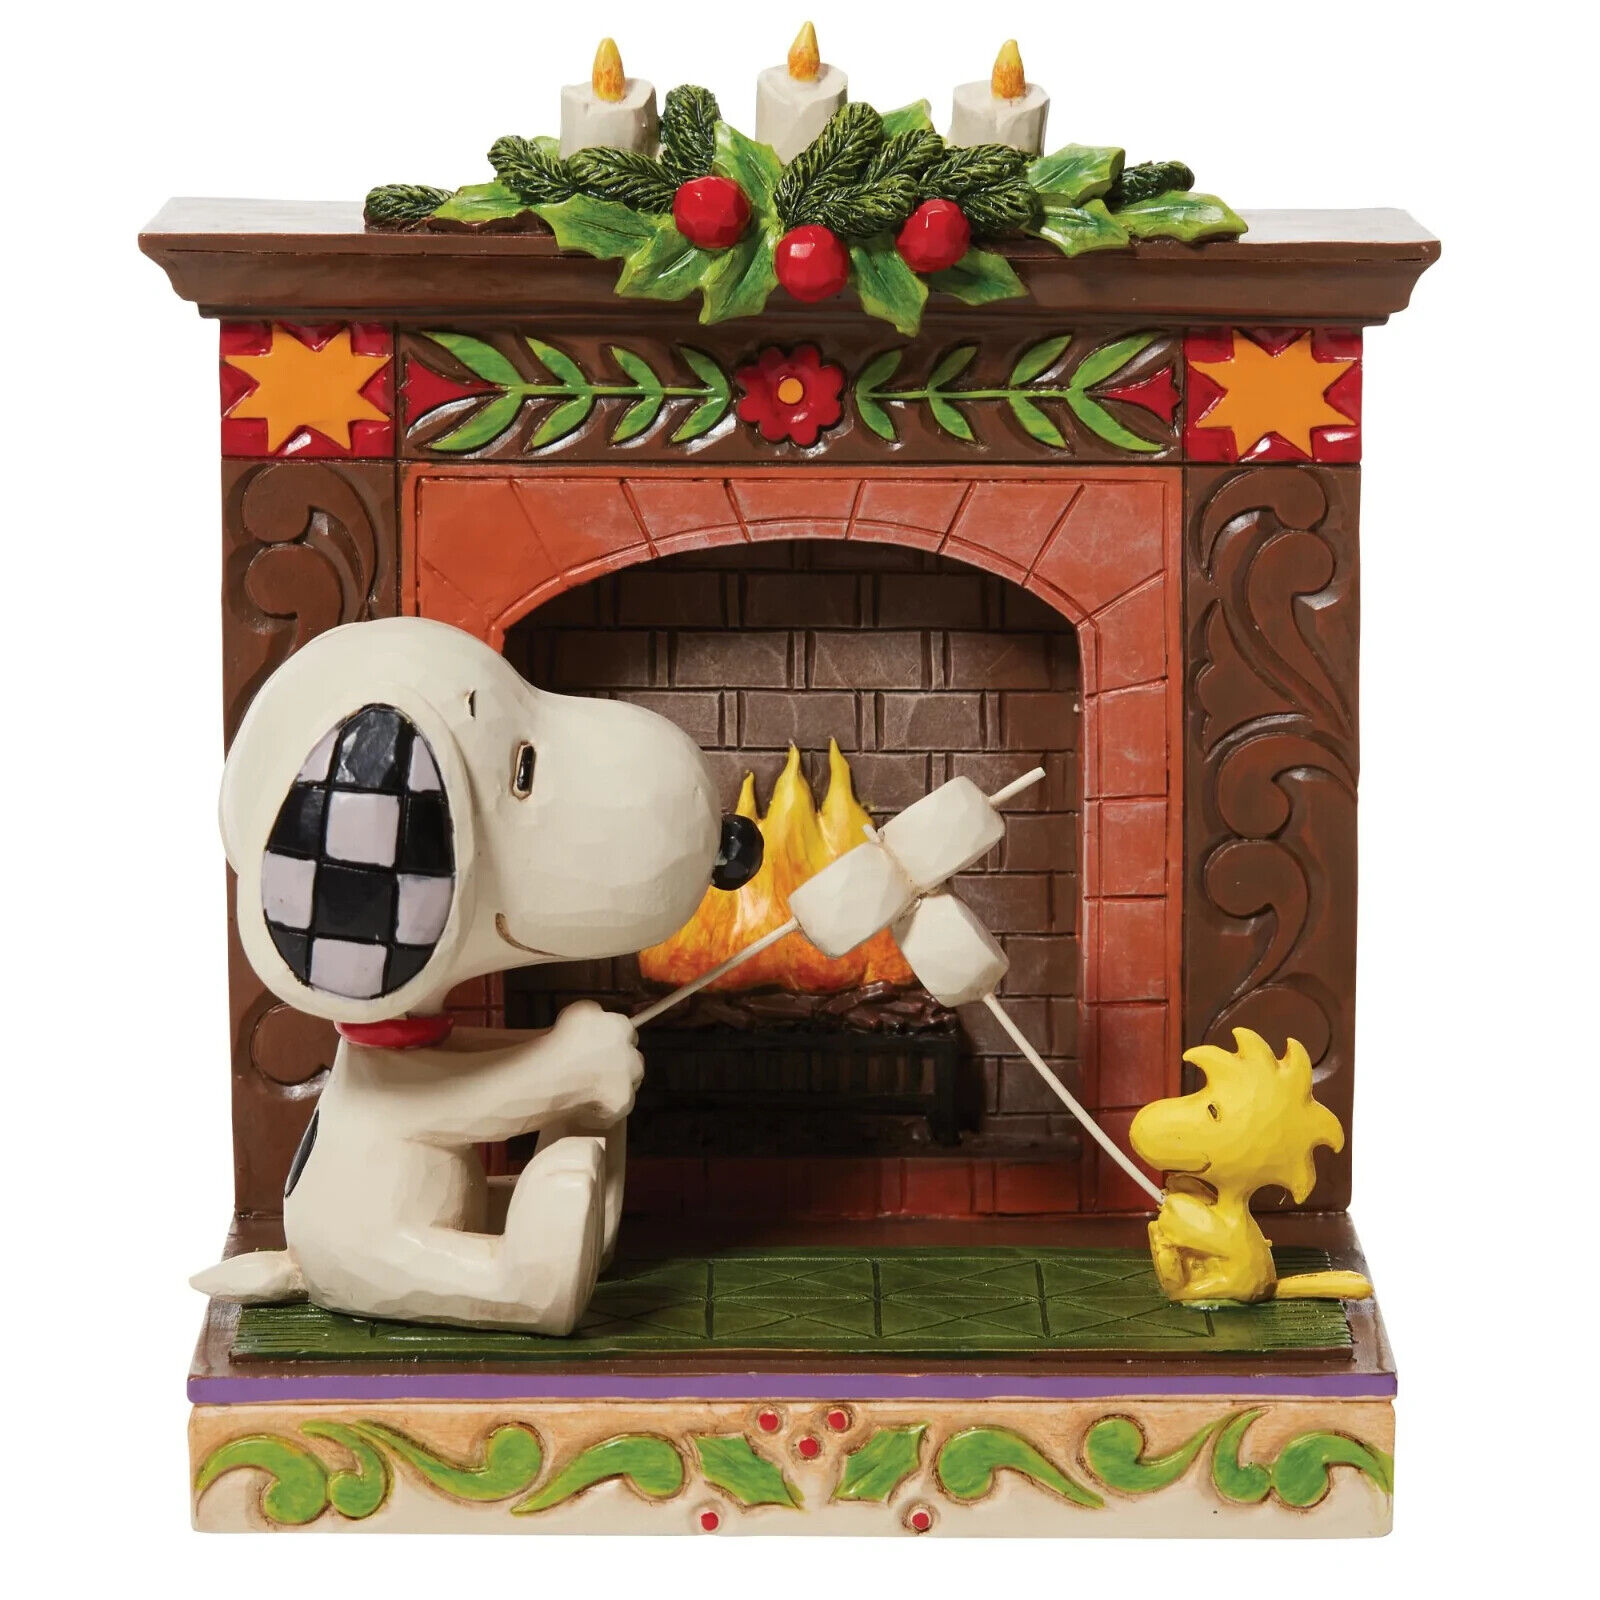 Jim Shore Peanuts SNOOPY AND WOODSTOCK FIREPLACE-FRIENDSHIP BY FIRESIDE 6010325